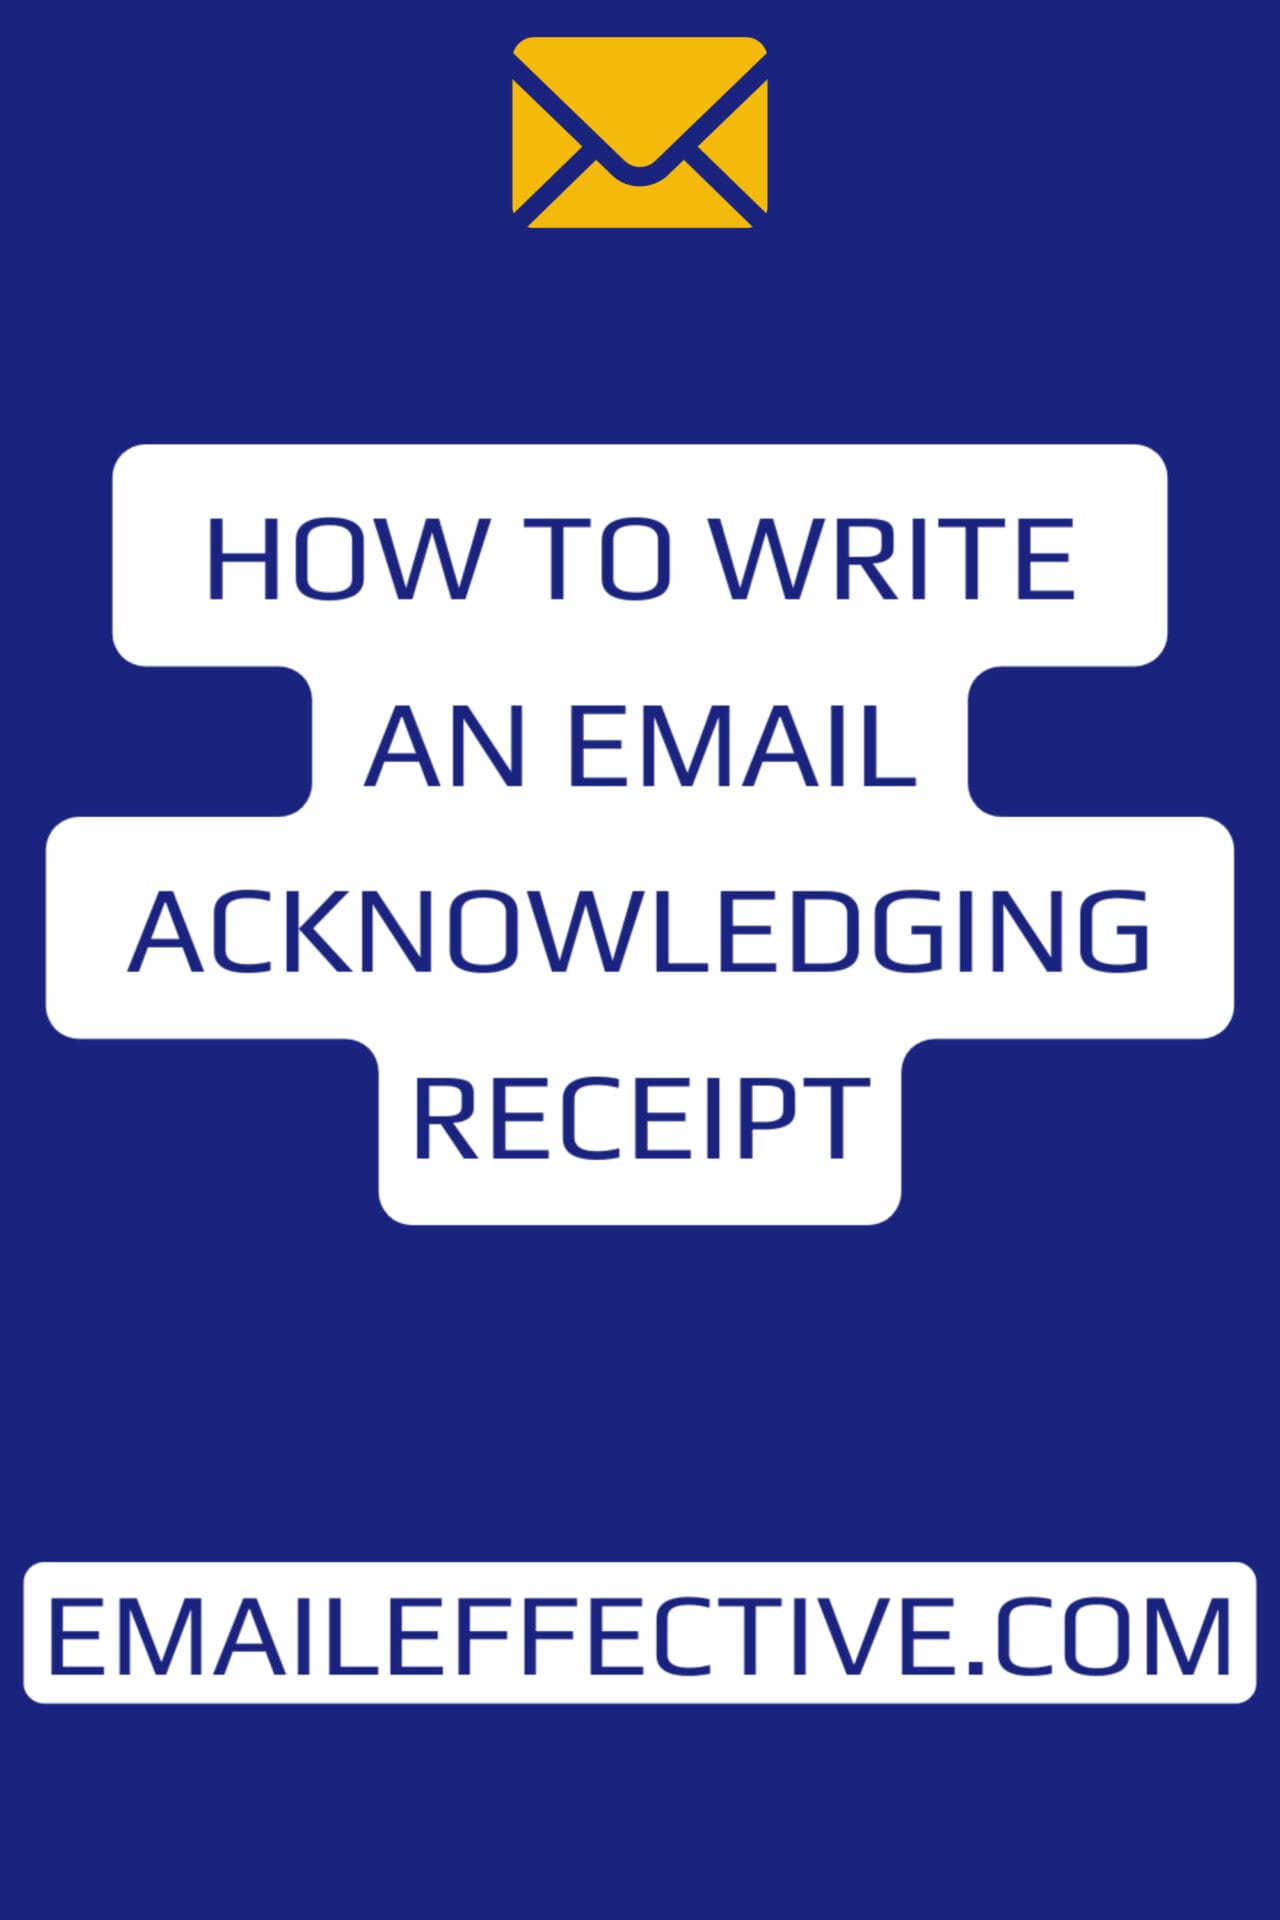 How to Write an Email Acknowledging Receipt